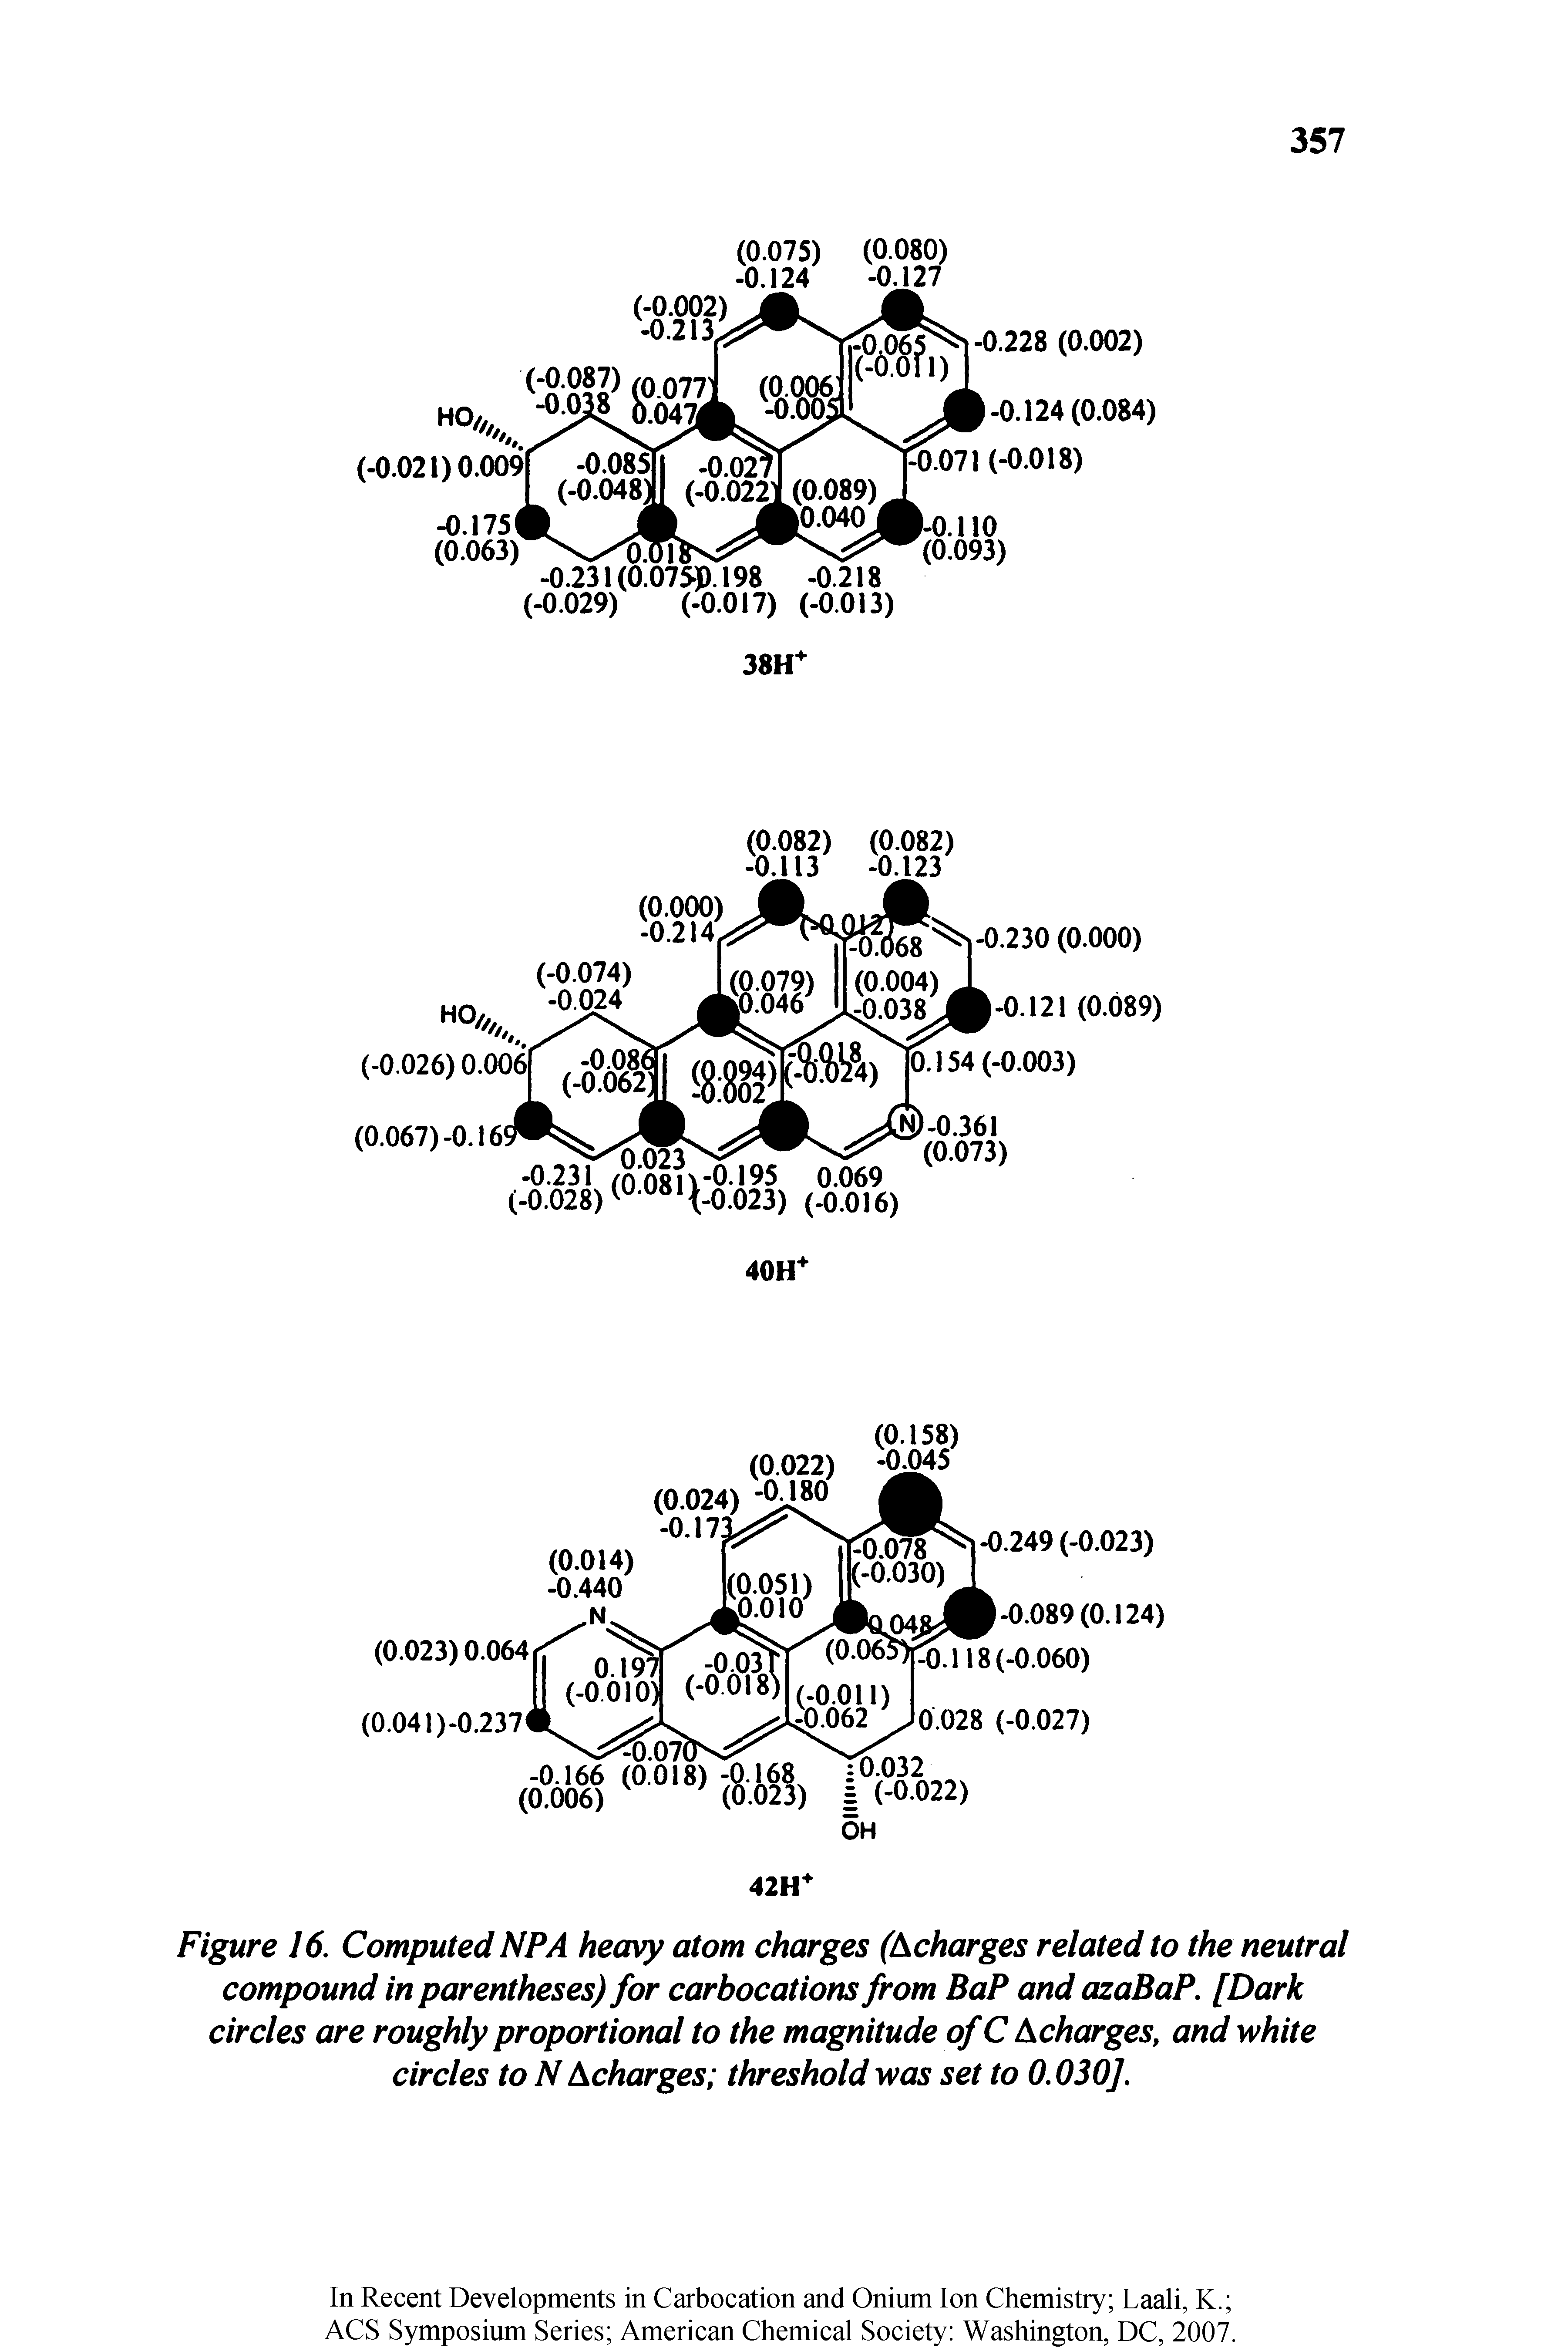 Figure 16. Computed NPA heavy atom charges (Acharges related to the neutral compound in parentheses) for carbocations from BaP and azaBaP. [Dark circles are roughly proportional to the magnitude of C Acharges, and white circles to N Acharges threshold was set to 0.030].